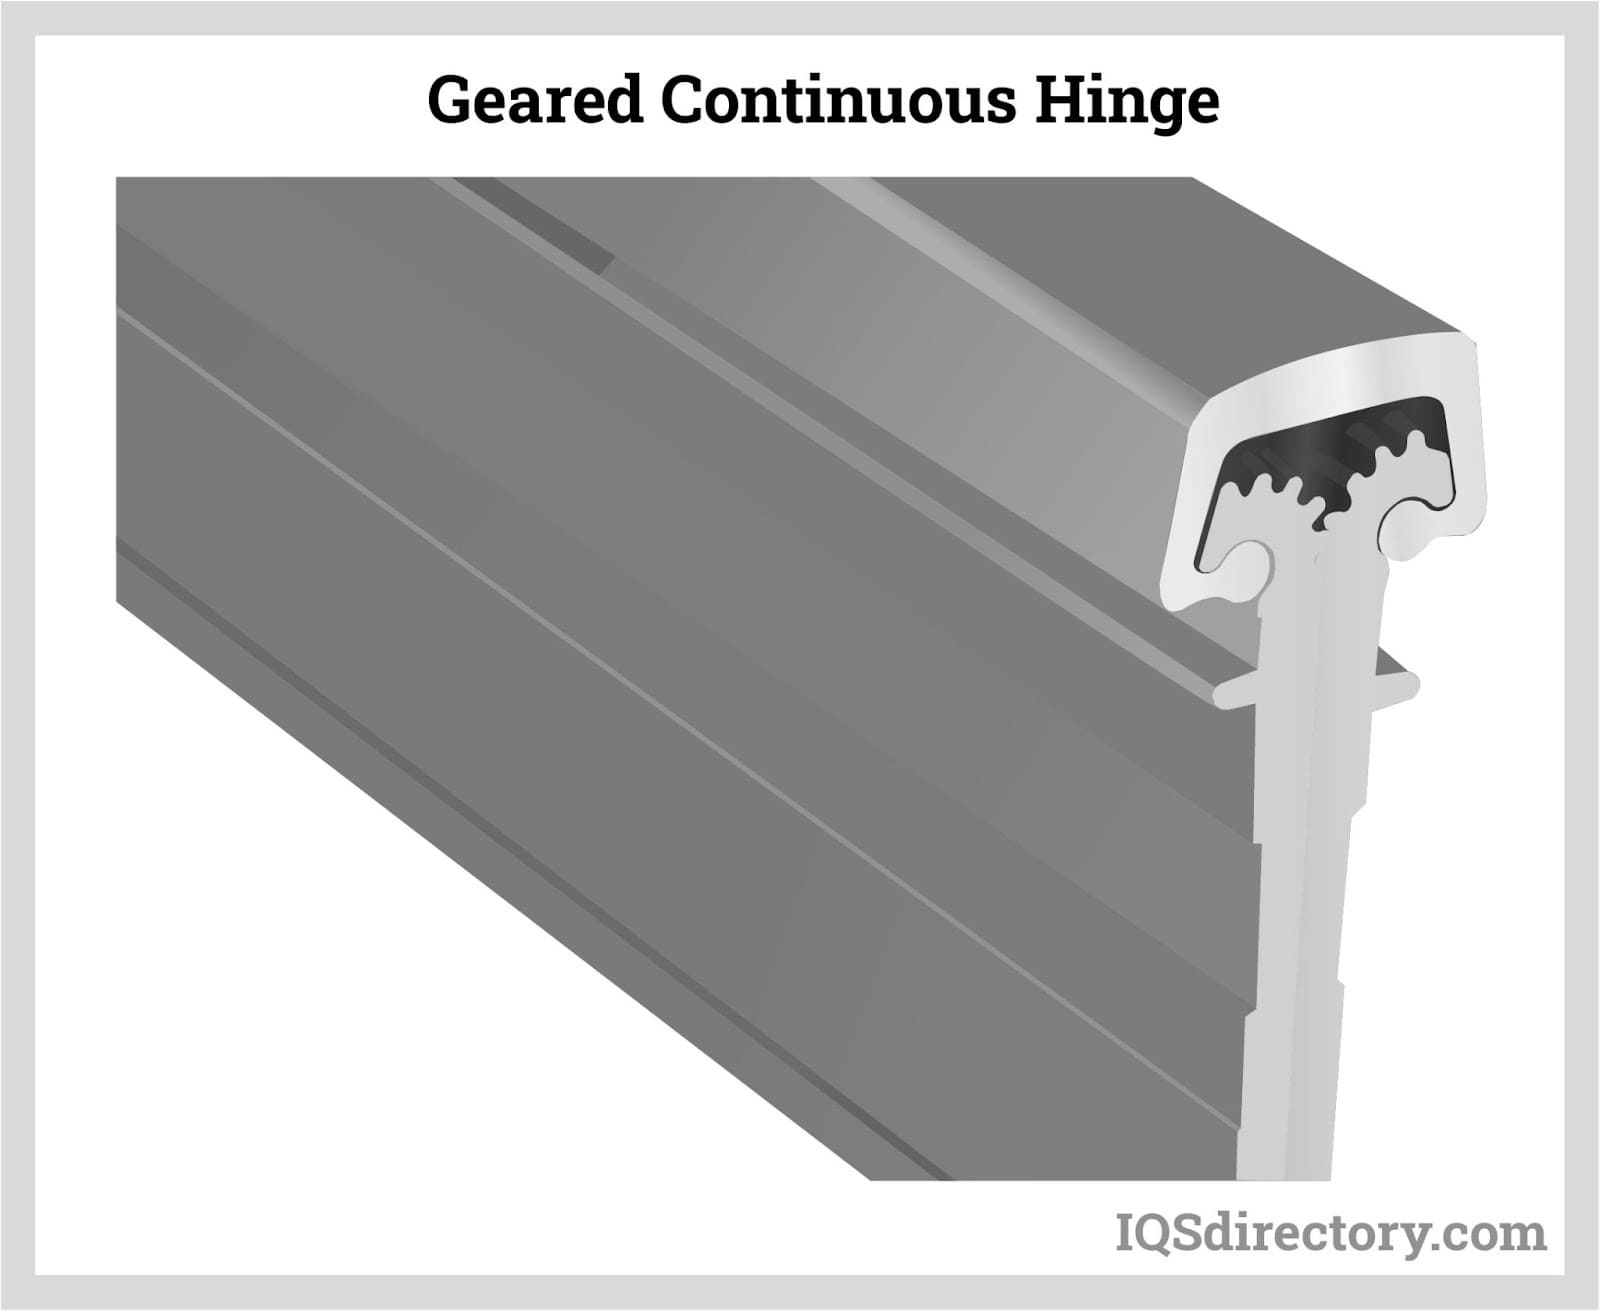 Geared Continuous Hinge